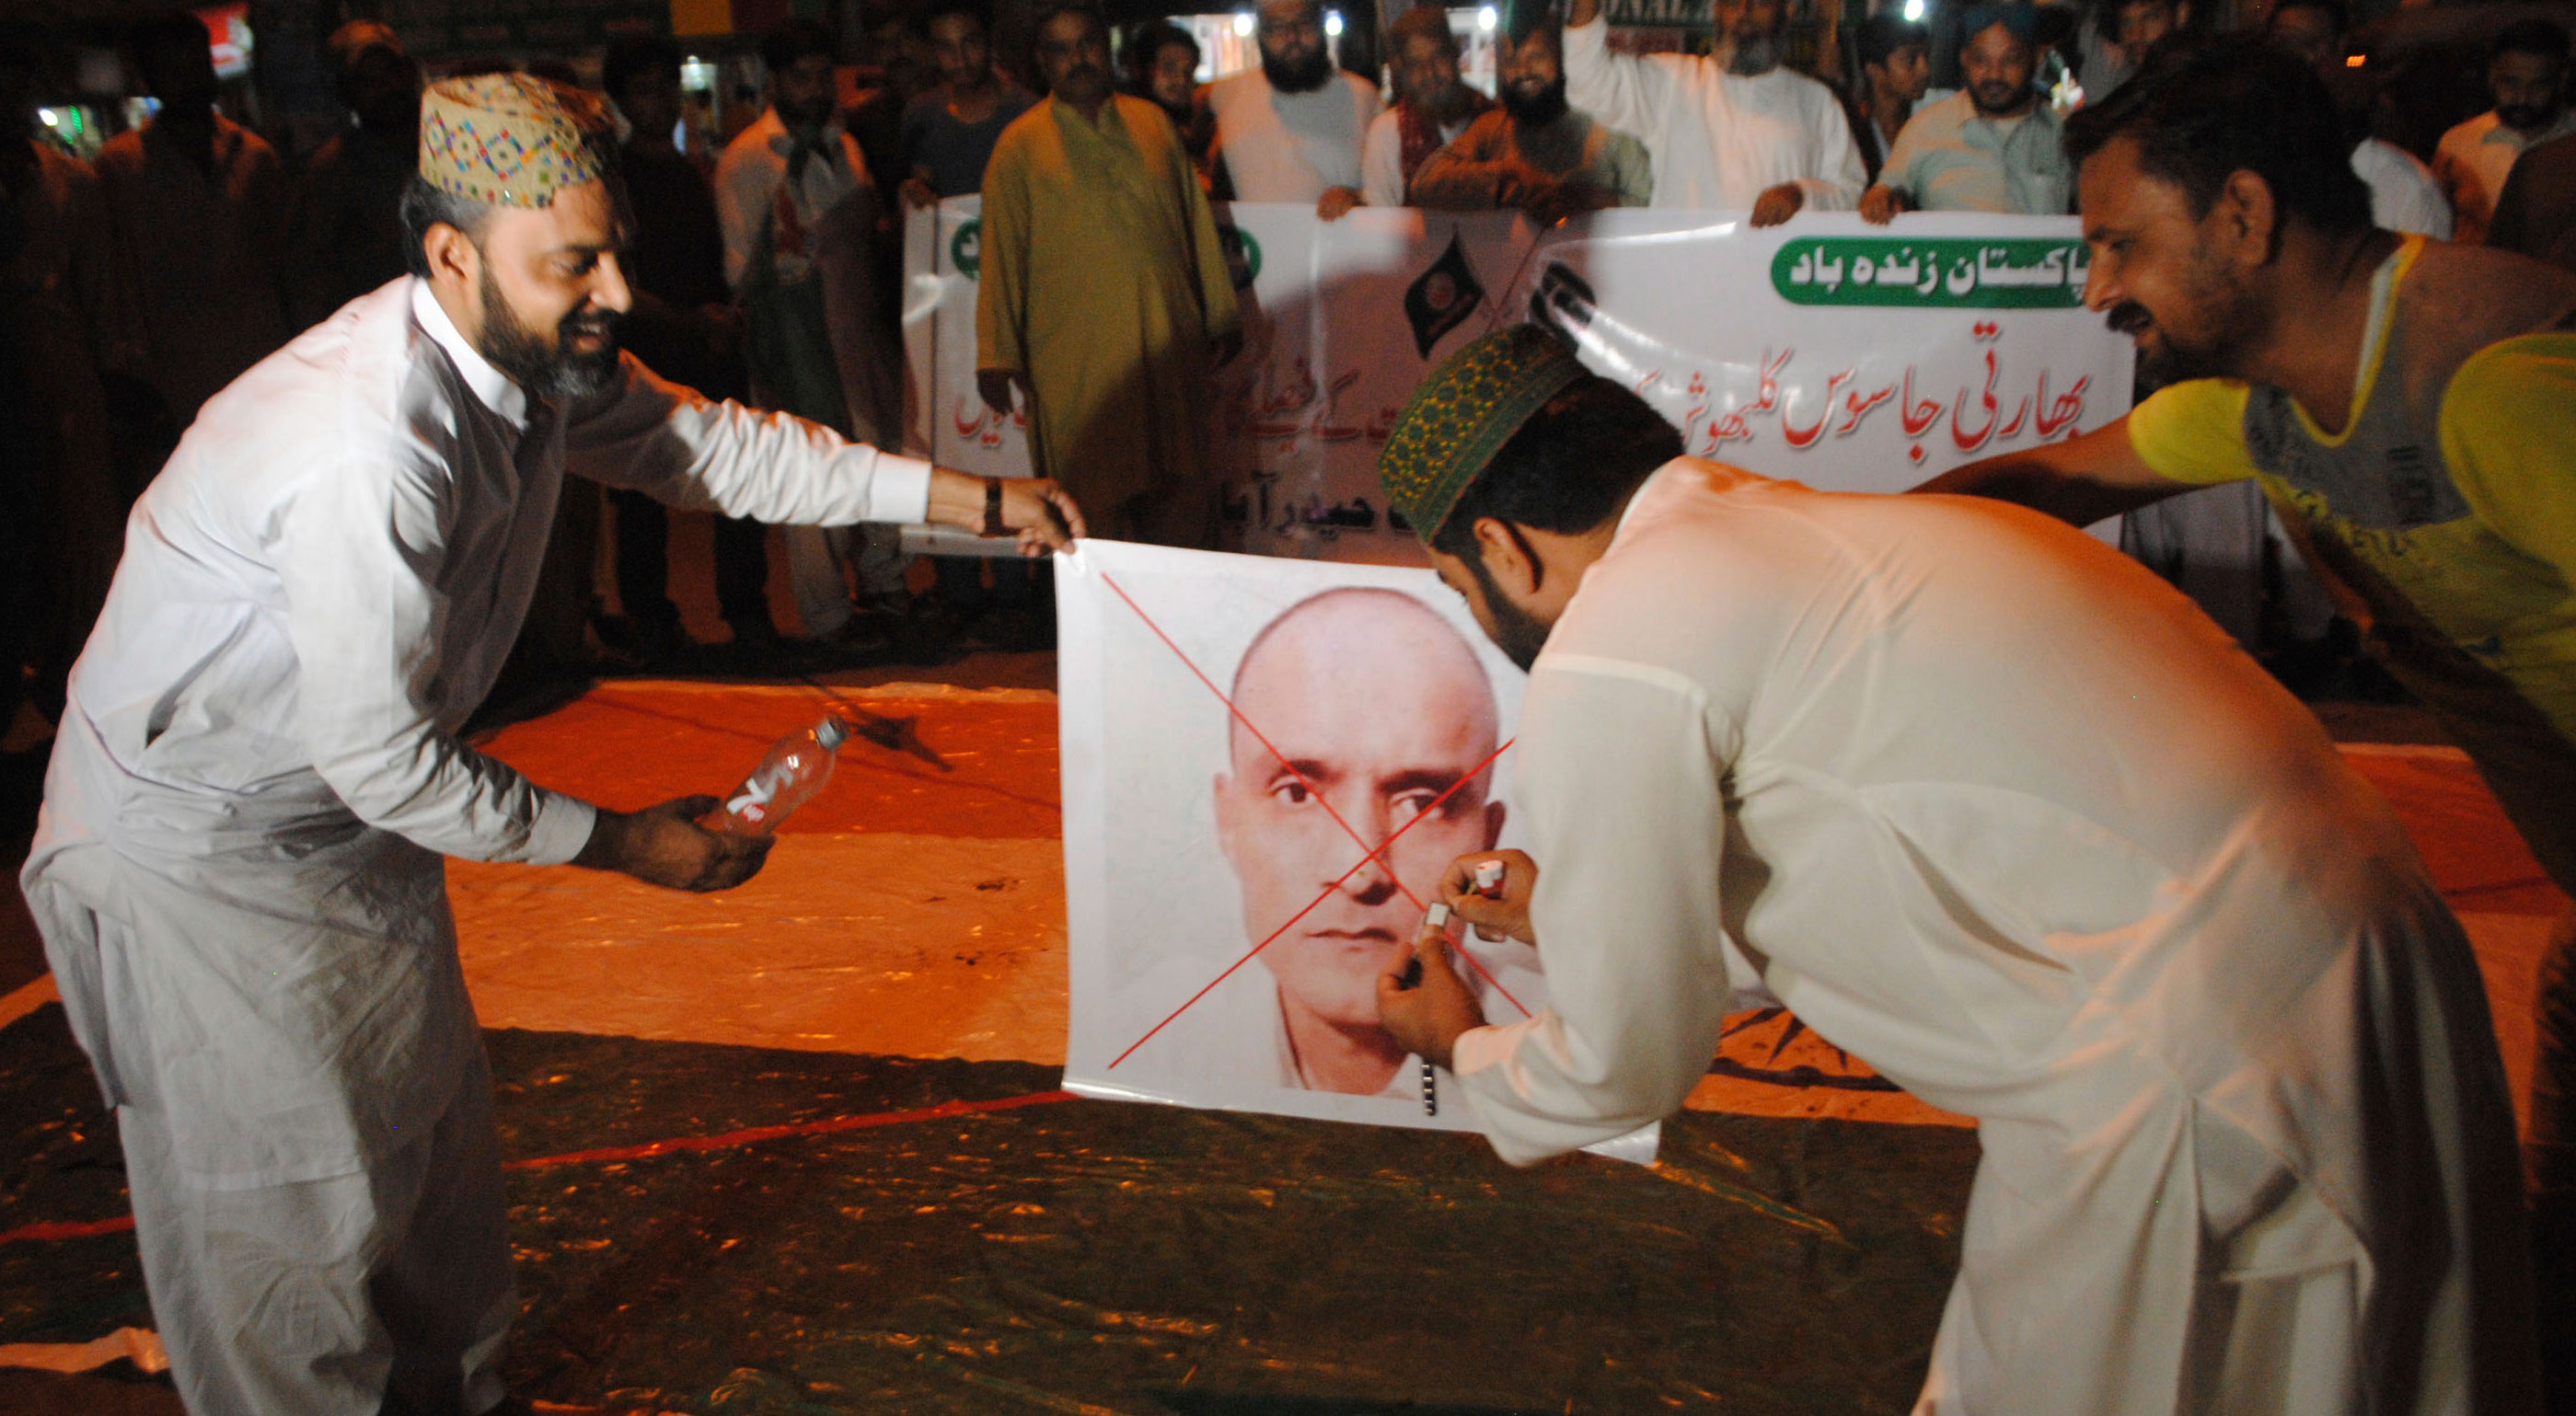 Pakistani protesters prepare to burn a poster of Kulbhushan Jadhav in Hyderabad, Pakistan, on July 17, 2019. India has maintained that Jadhav was kidnapped from Iran; Pakistan argues that Jadhav was arrested in Balochistan, near the border with Iran, after entering Pakistani territory illegally. 
